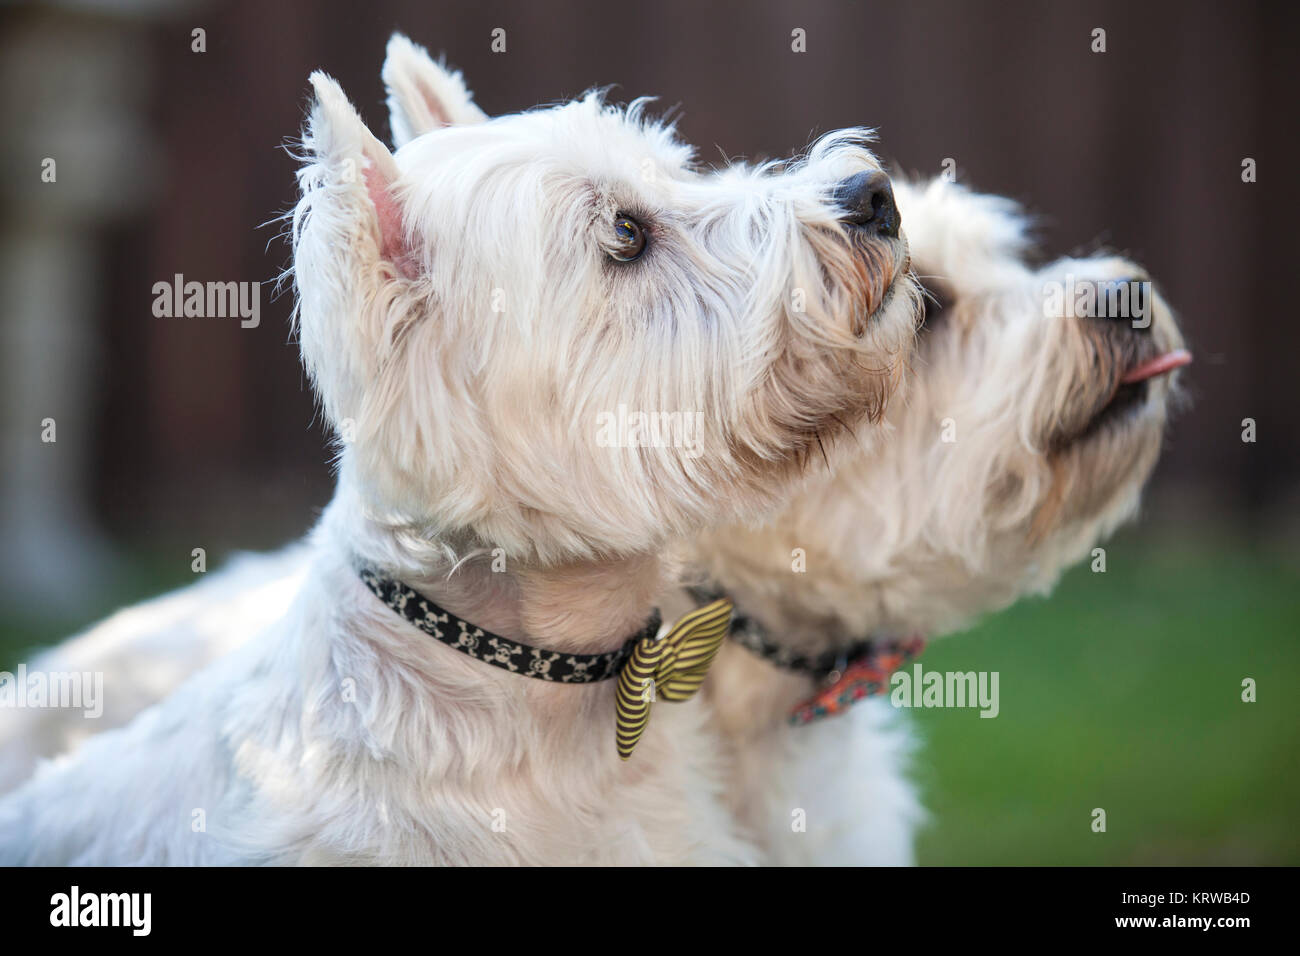 Two white canine friends posing outdoors Stock Photo